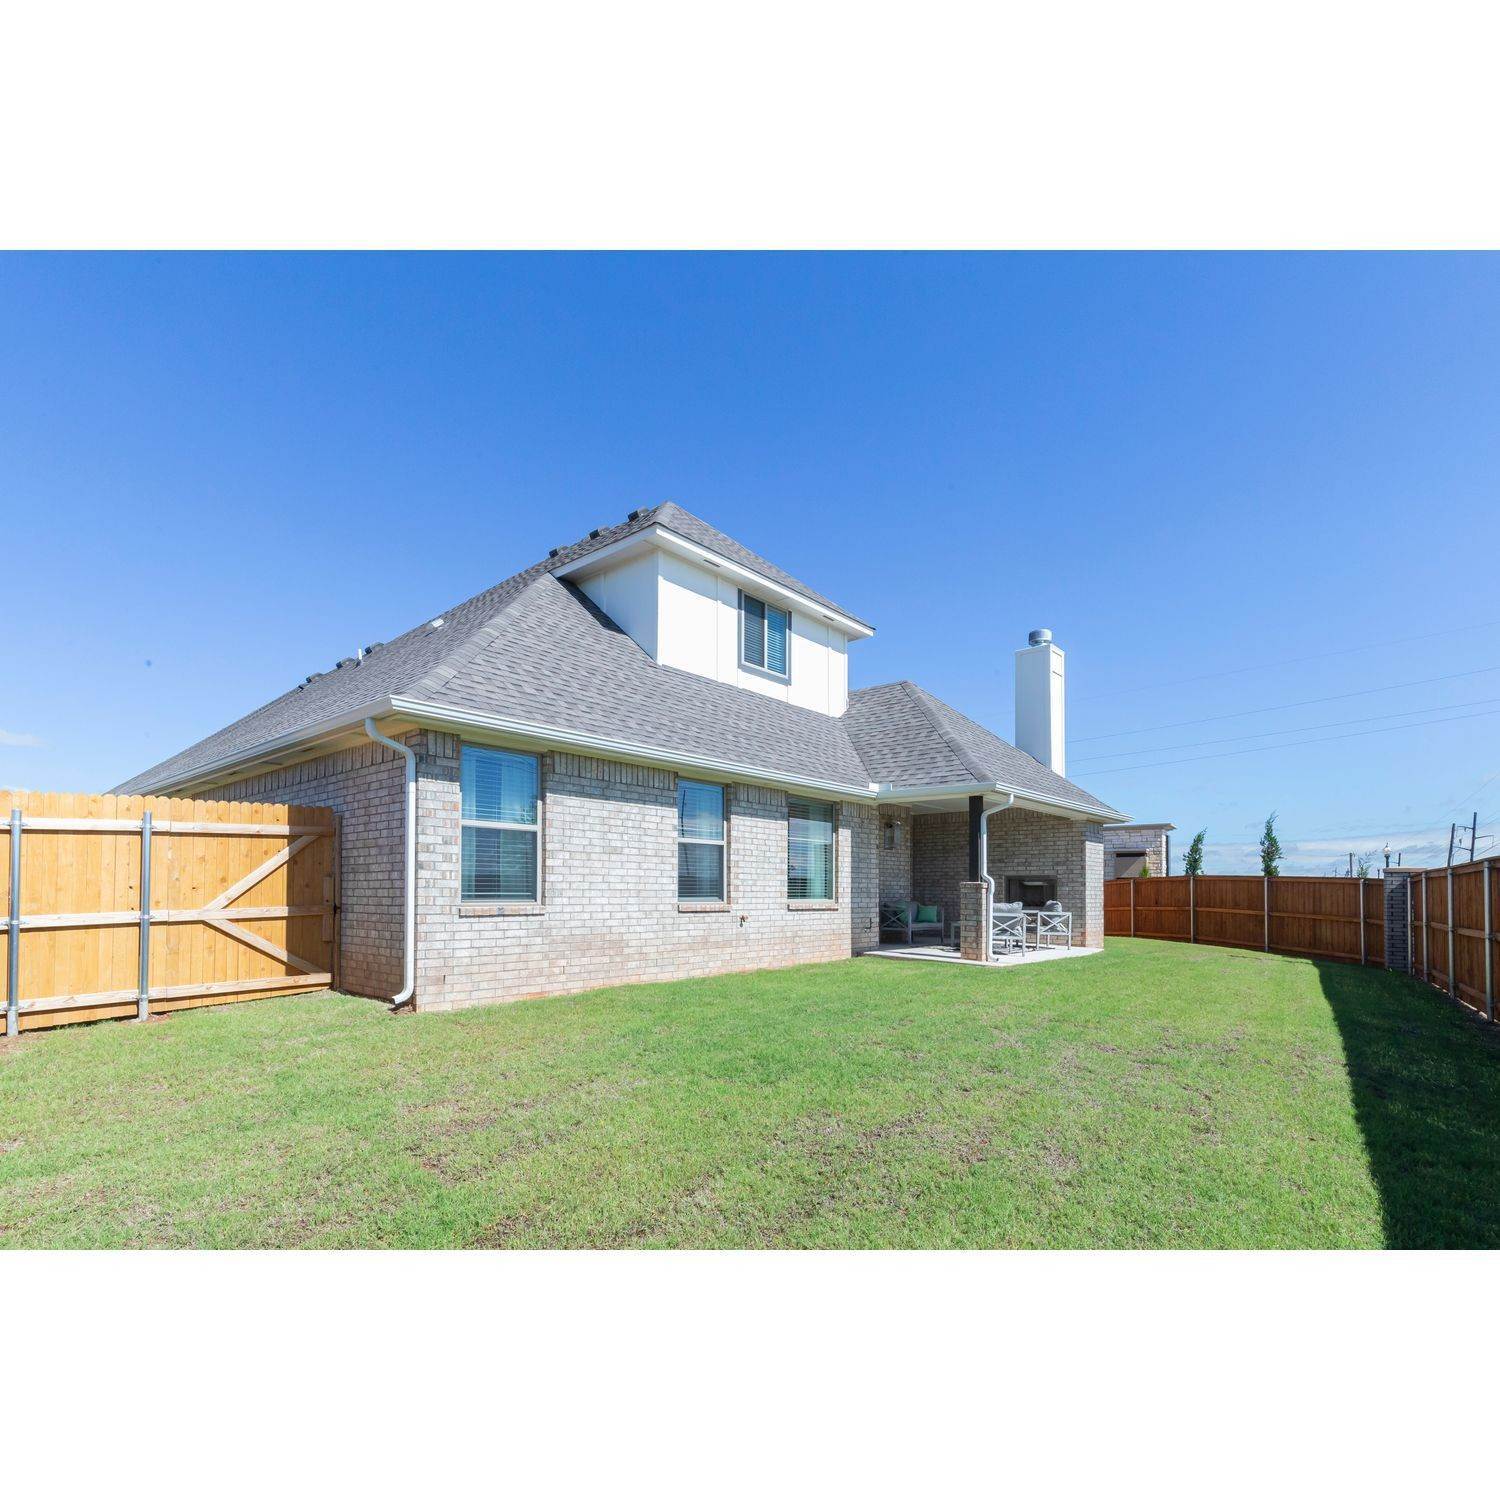 39. Broadmoore Heights building at 2800 Heather Haven, Moore, OK 73160